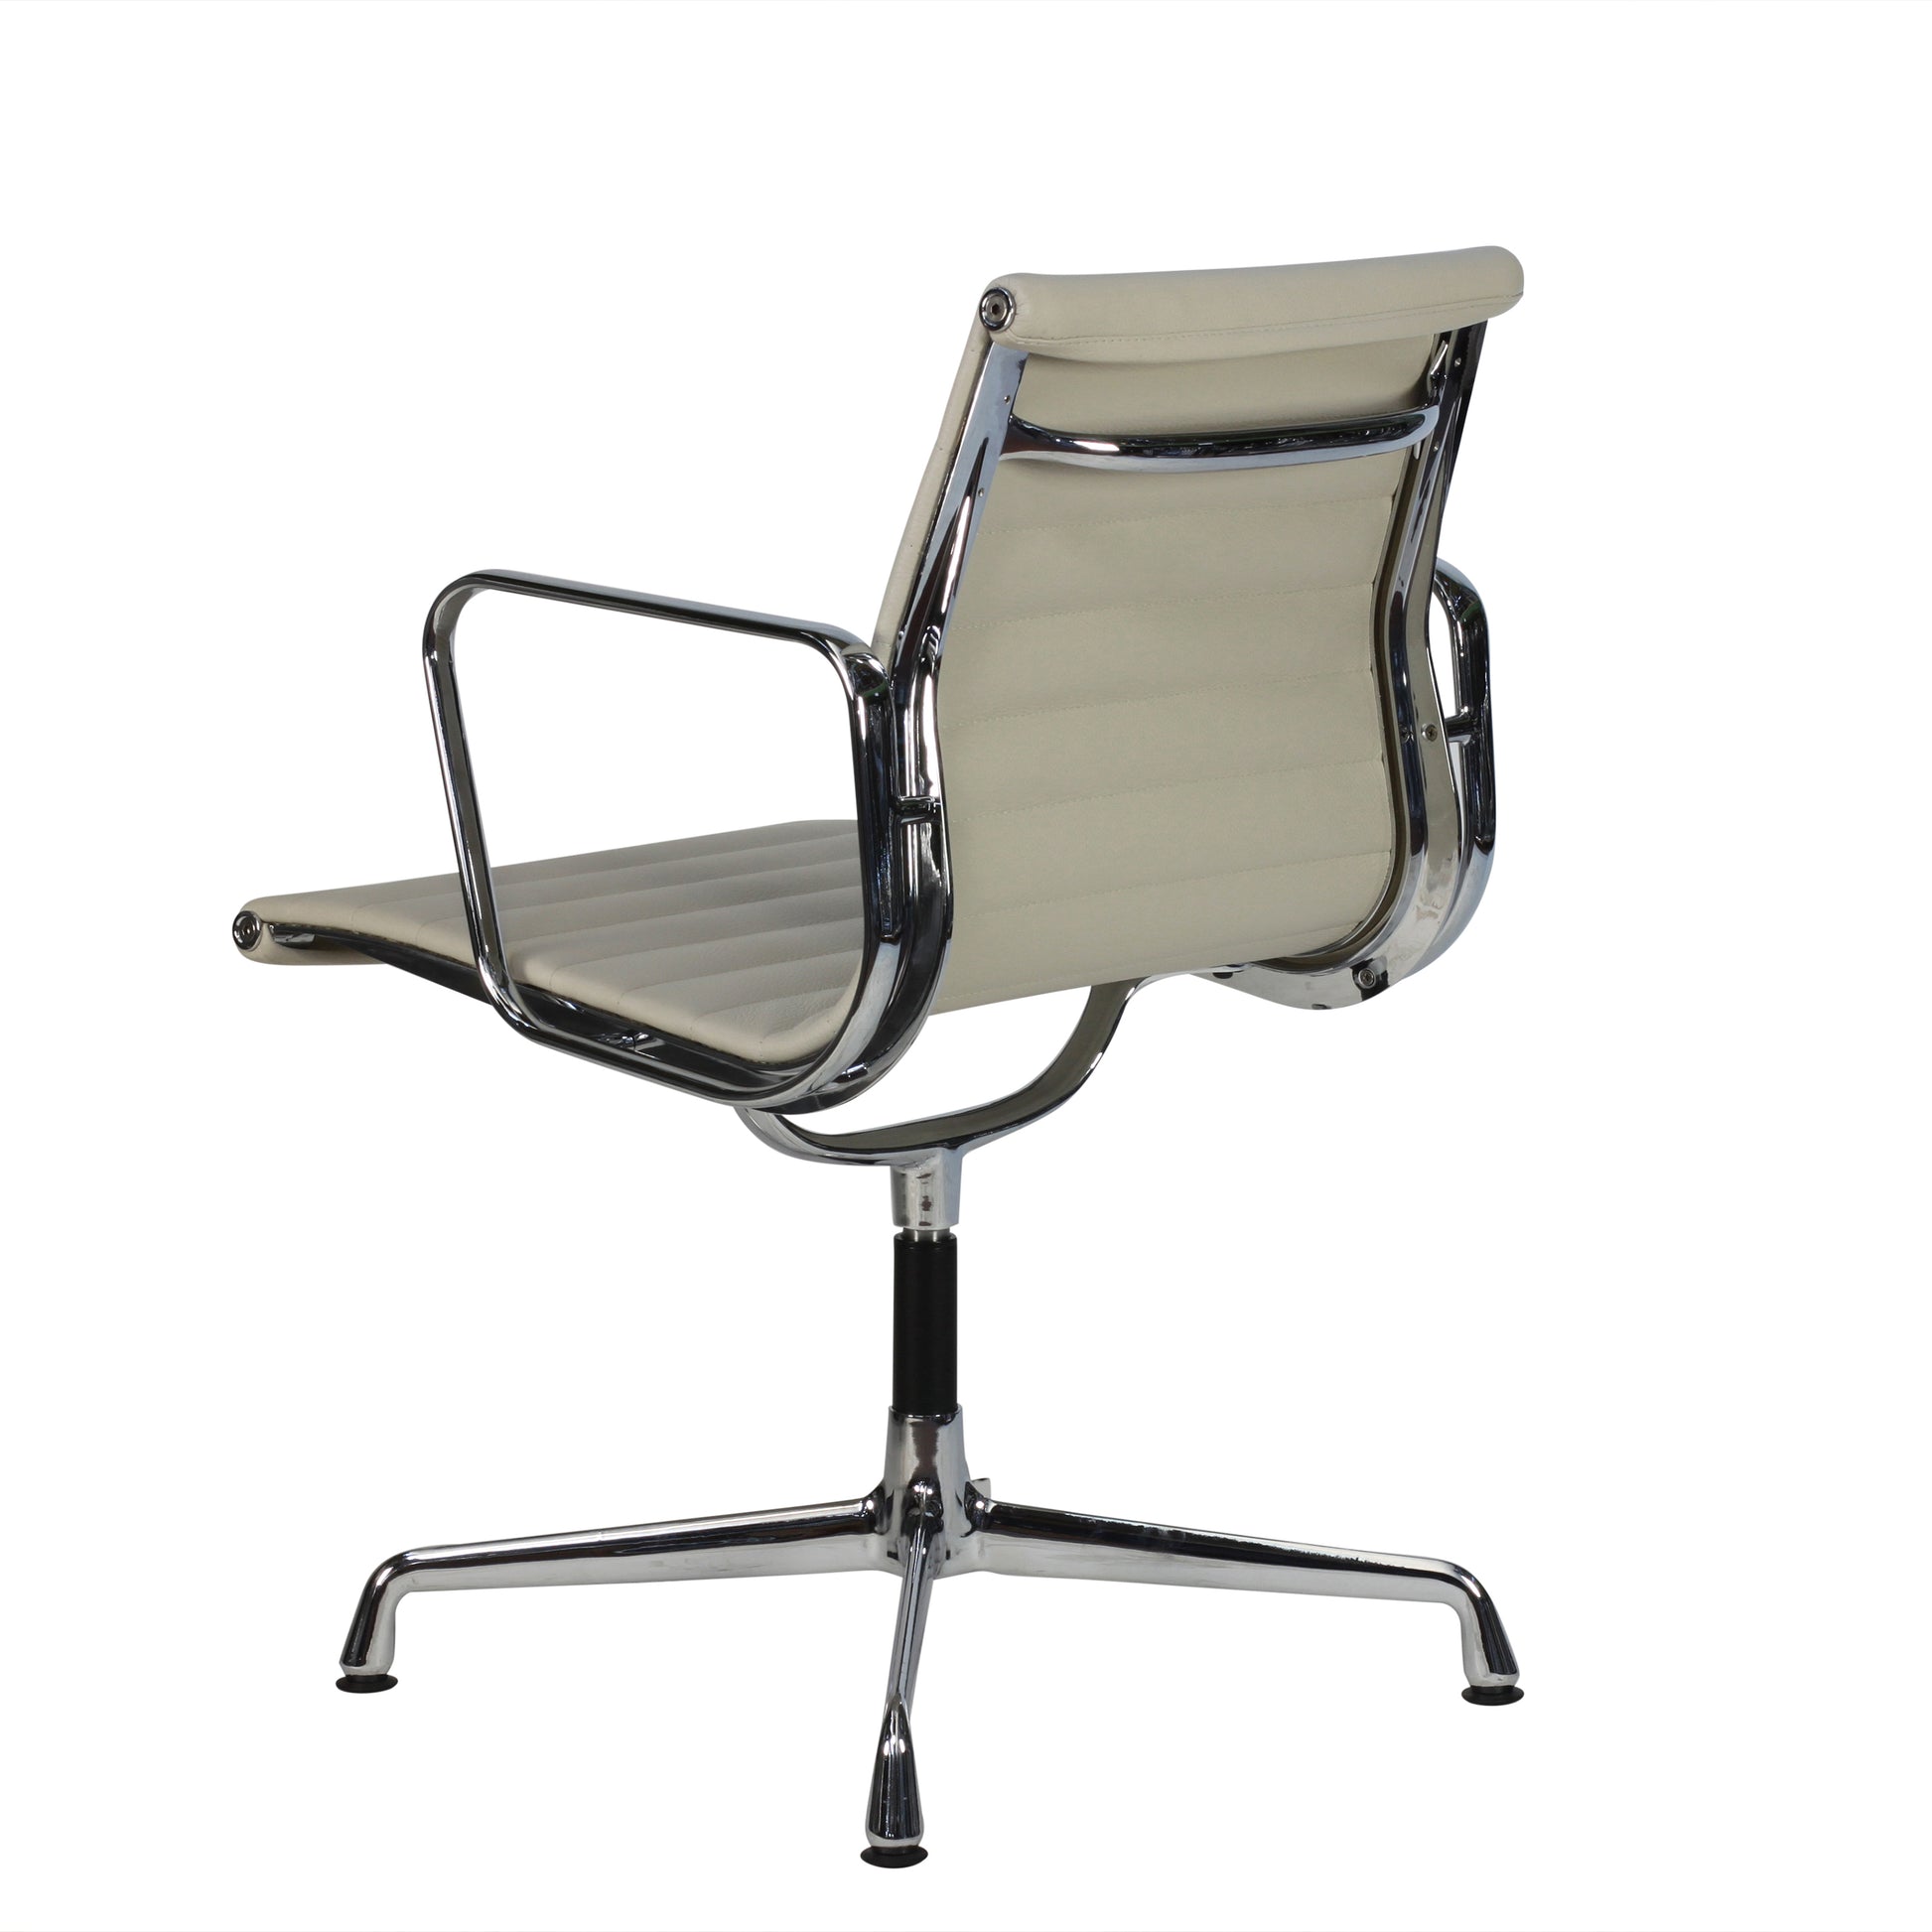 Chair without wheels aluminium style | Milk Leather | Side